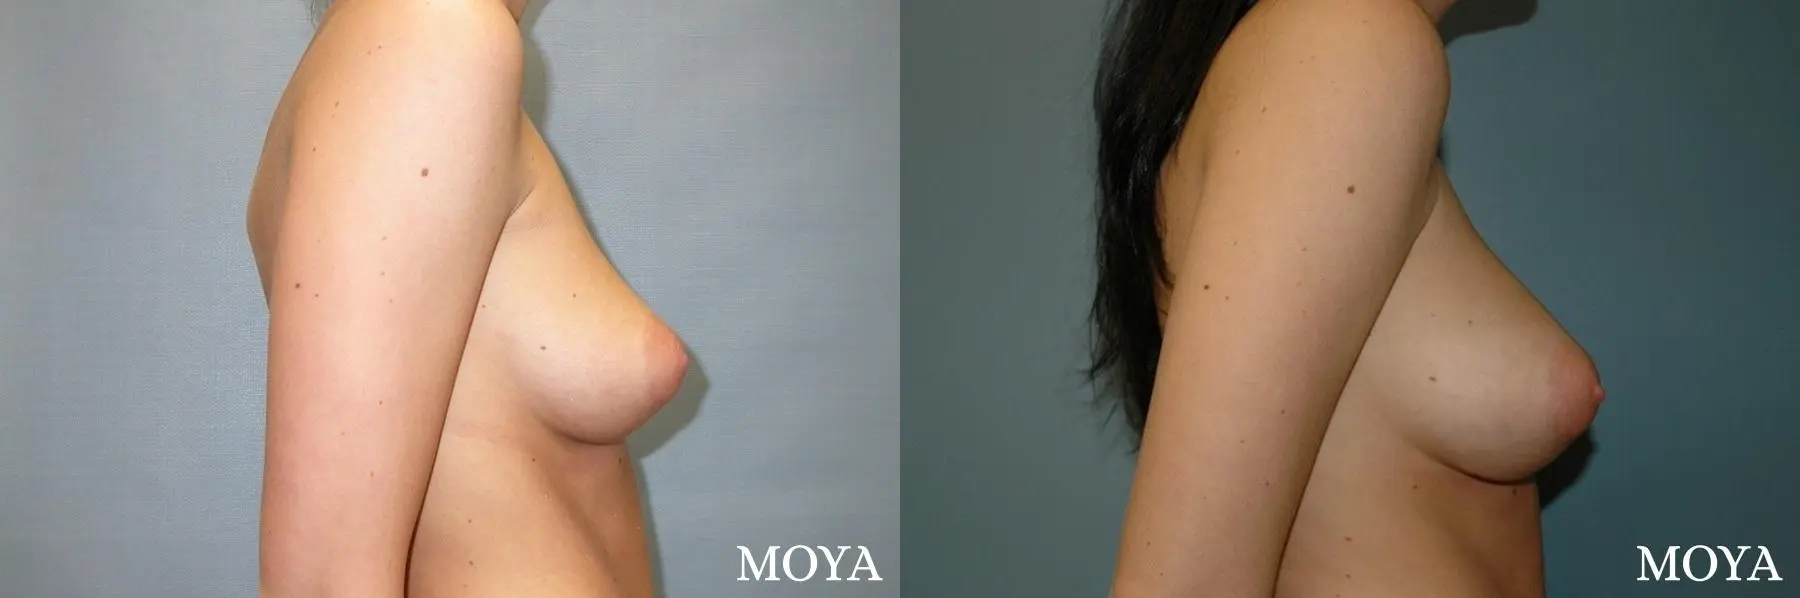 Breast Asymmetry: Patient 2 - Before and After 2